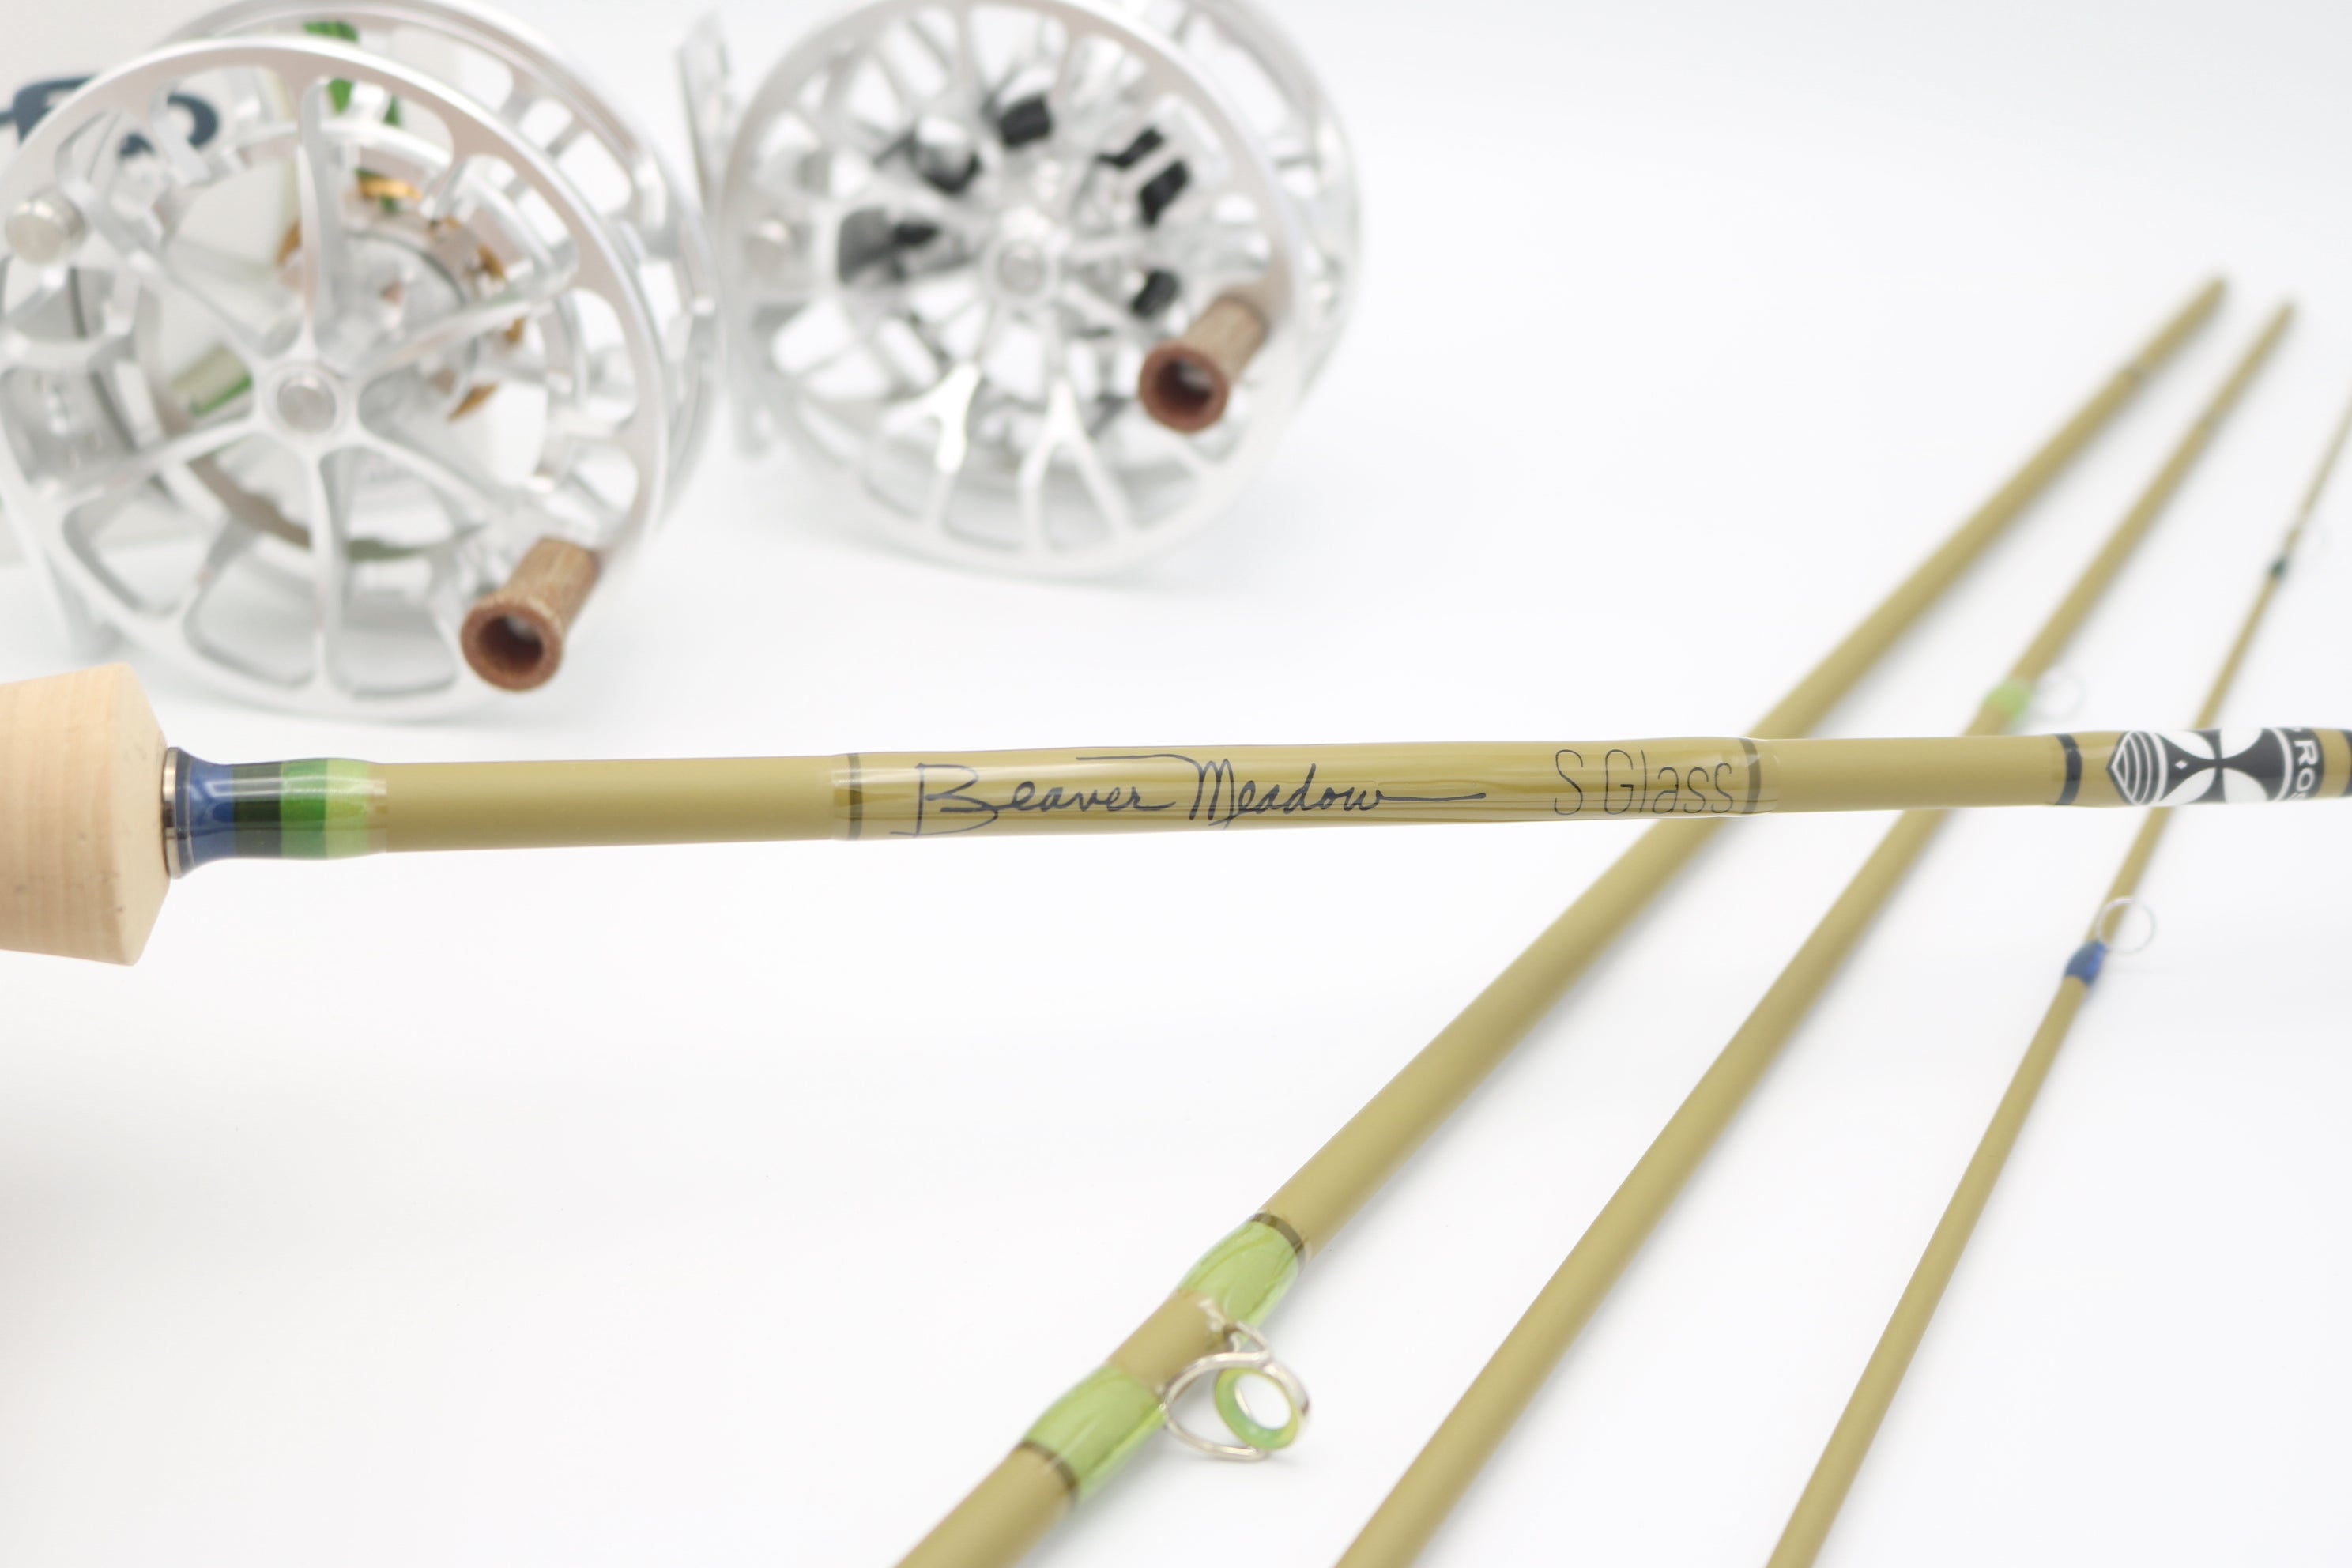 S-Glass Platinum Edition fly rod combo